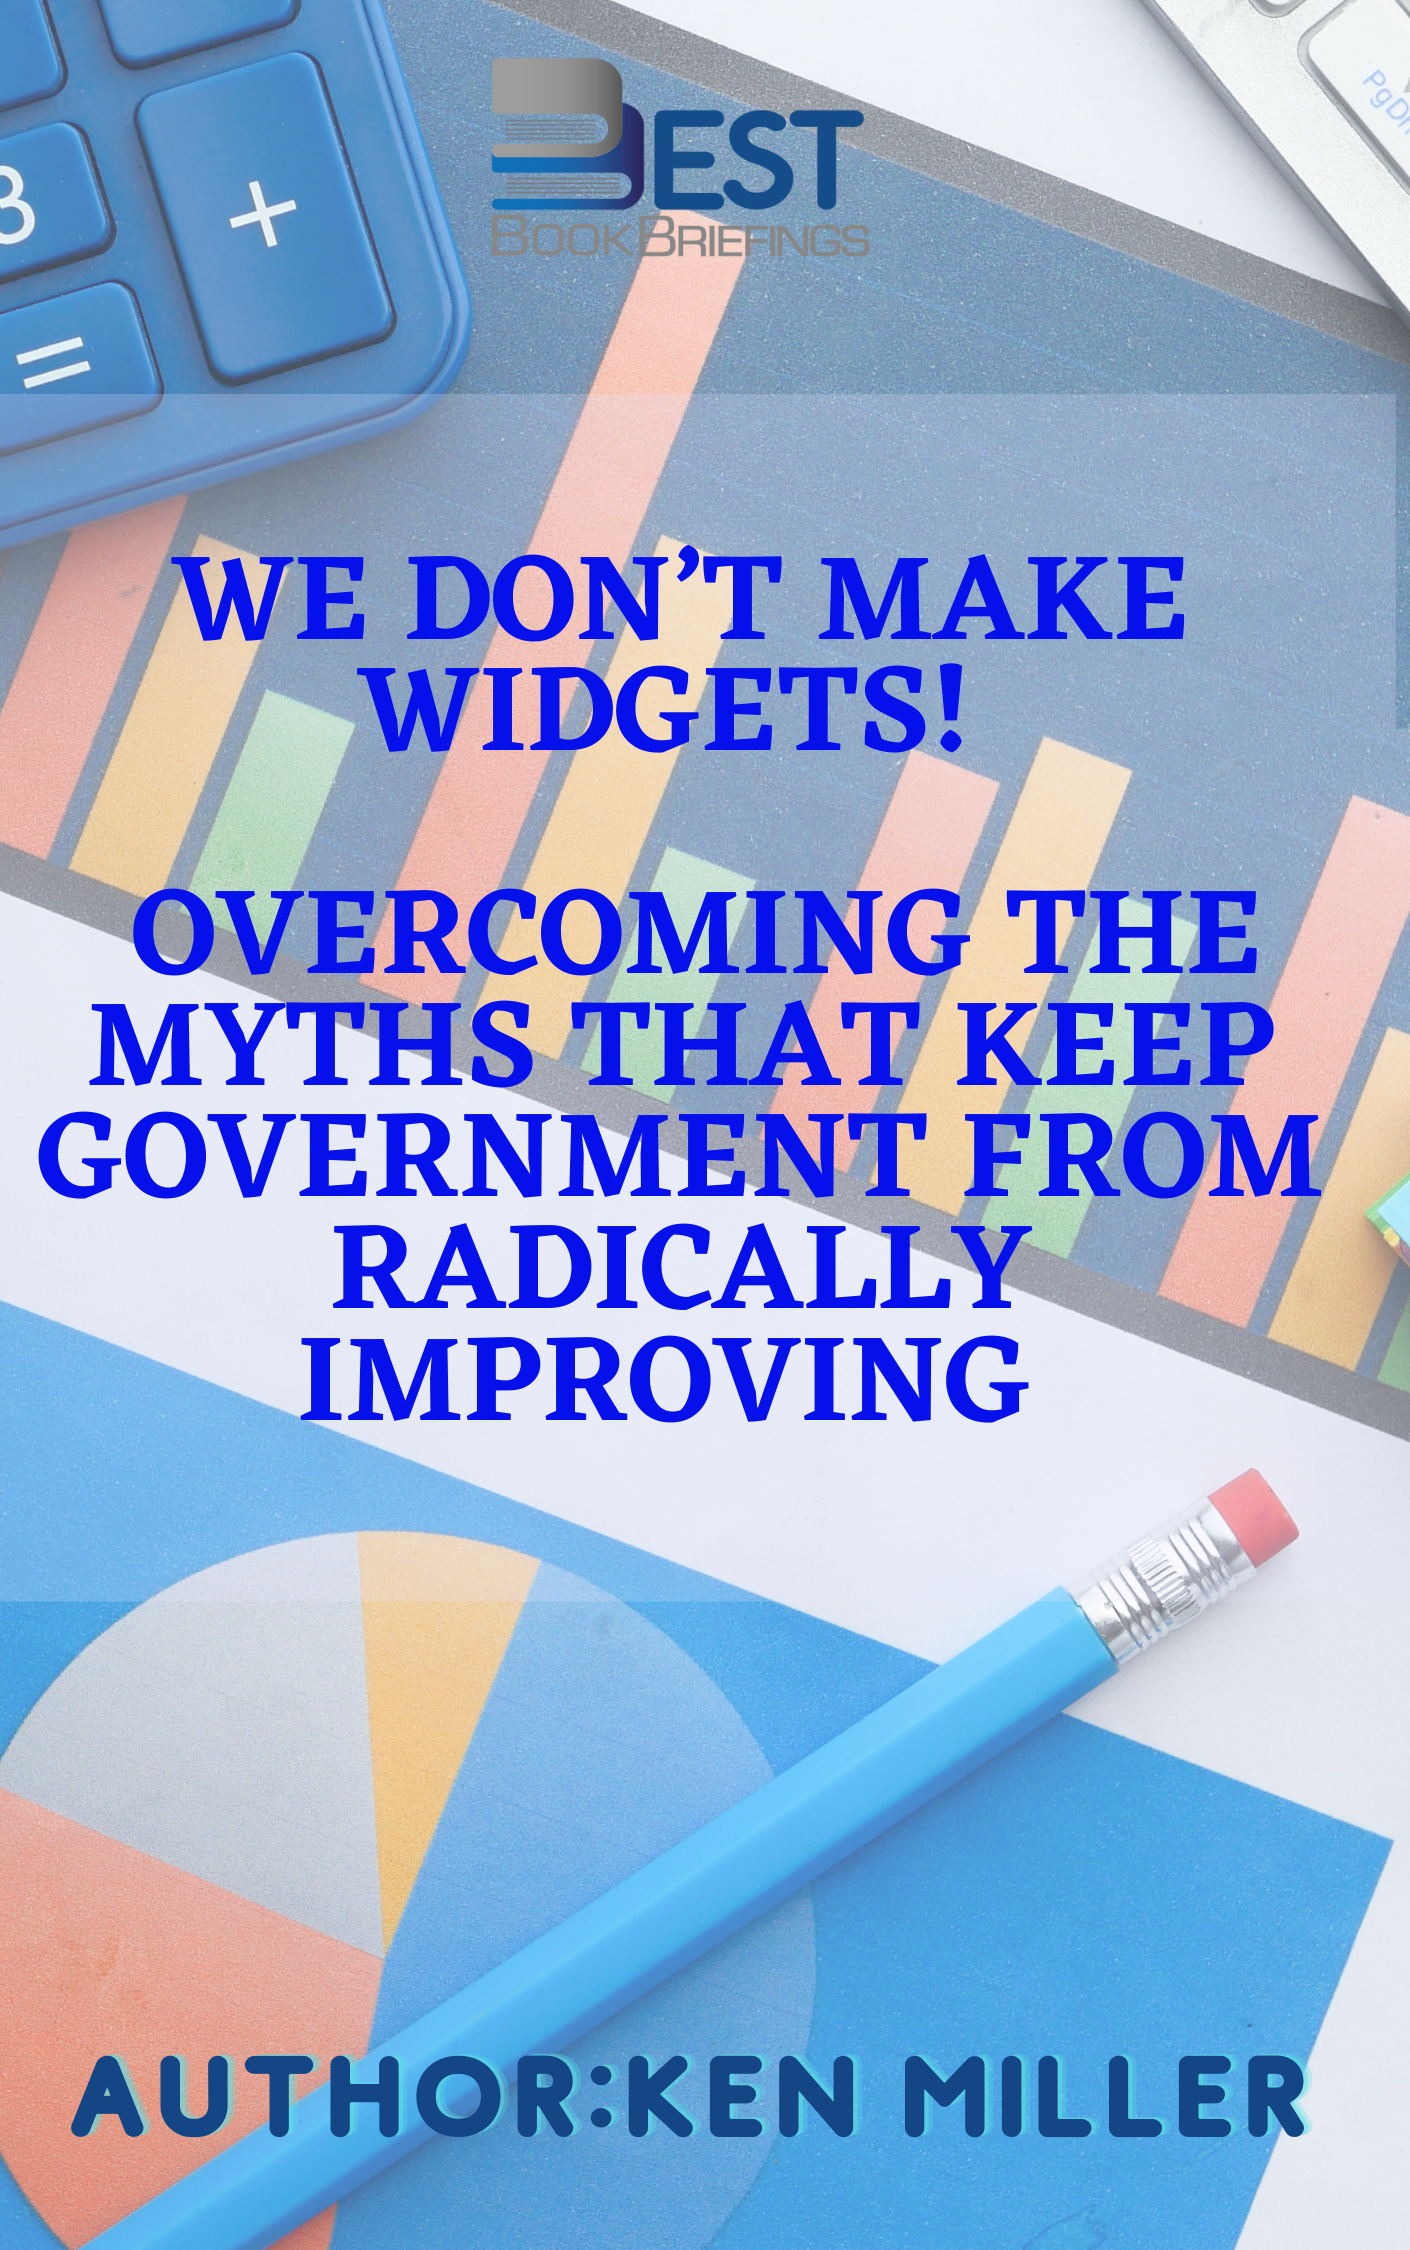 What we believe about government—that we don’t make widgets, that we don’t have customers, and that we’re not here to make a profit—all feed the bigger myth: that we’re different. We Don’t Make Widgets explodes the myths that prevent dramatic improvement in government operations. The aim of this book is to 